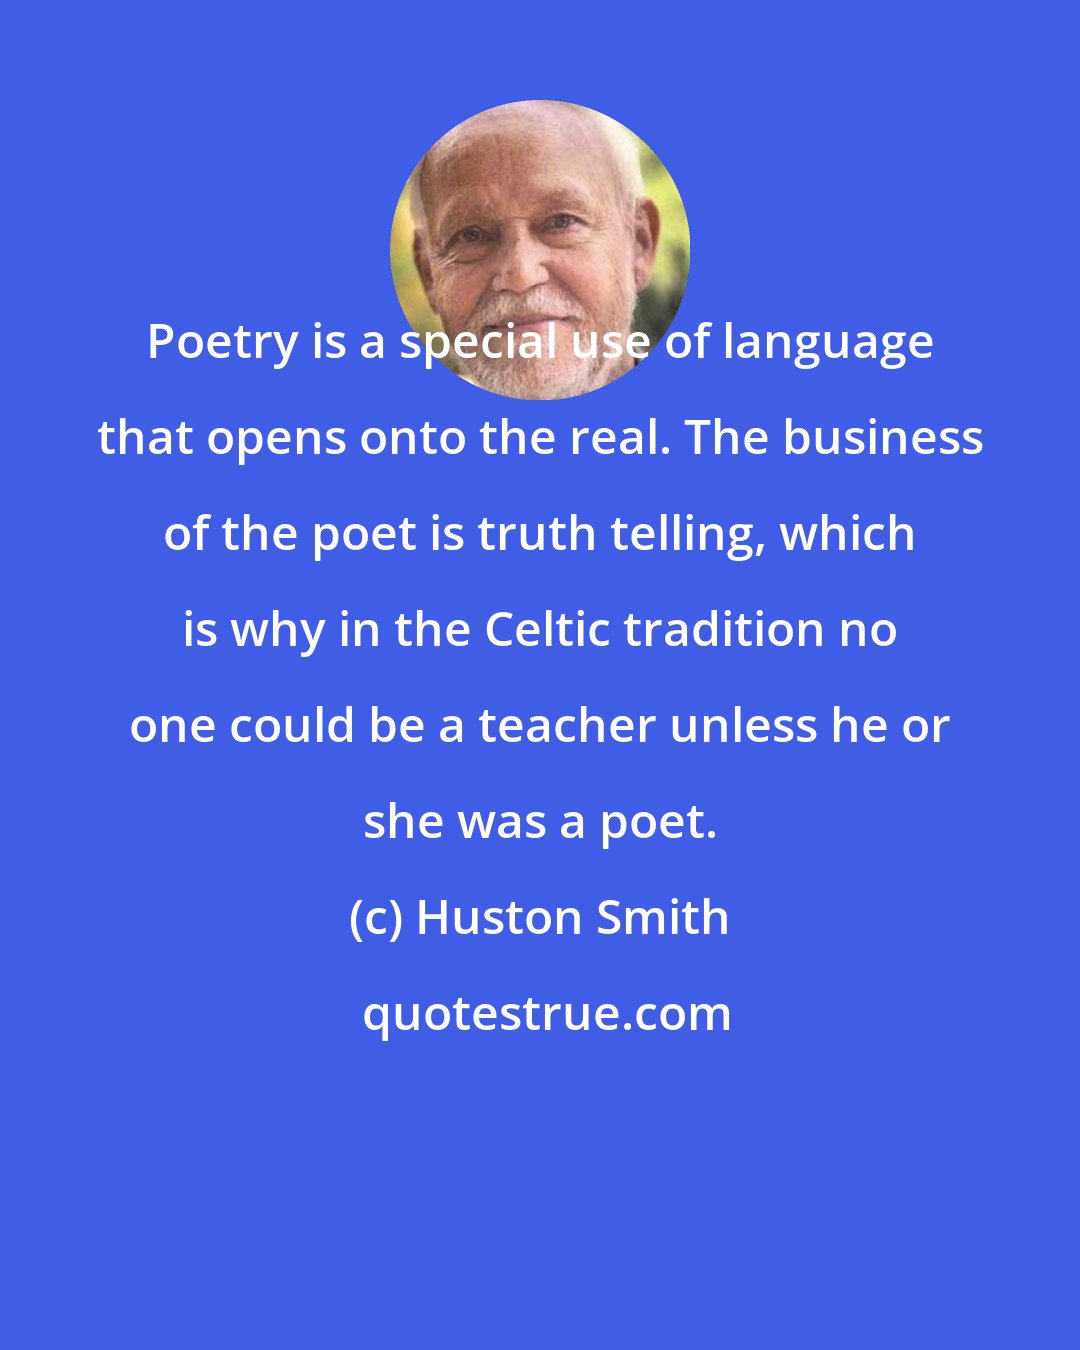 Huston Smith: Poetry is a special use of language that opens onto the real. The business of the poet is truth telling, which is why in the Celtic tradition no one could be a teacher unless he or she was a poet.